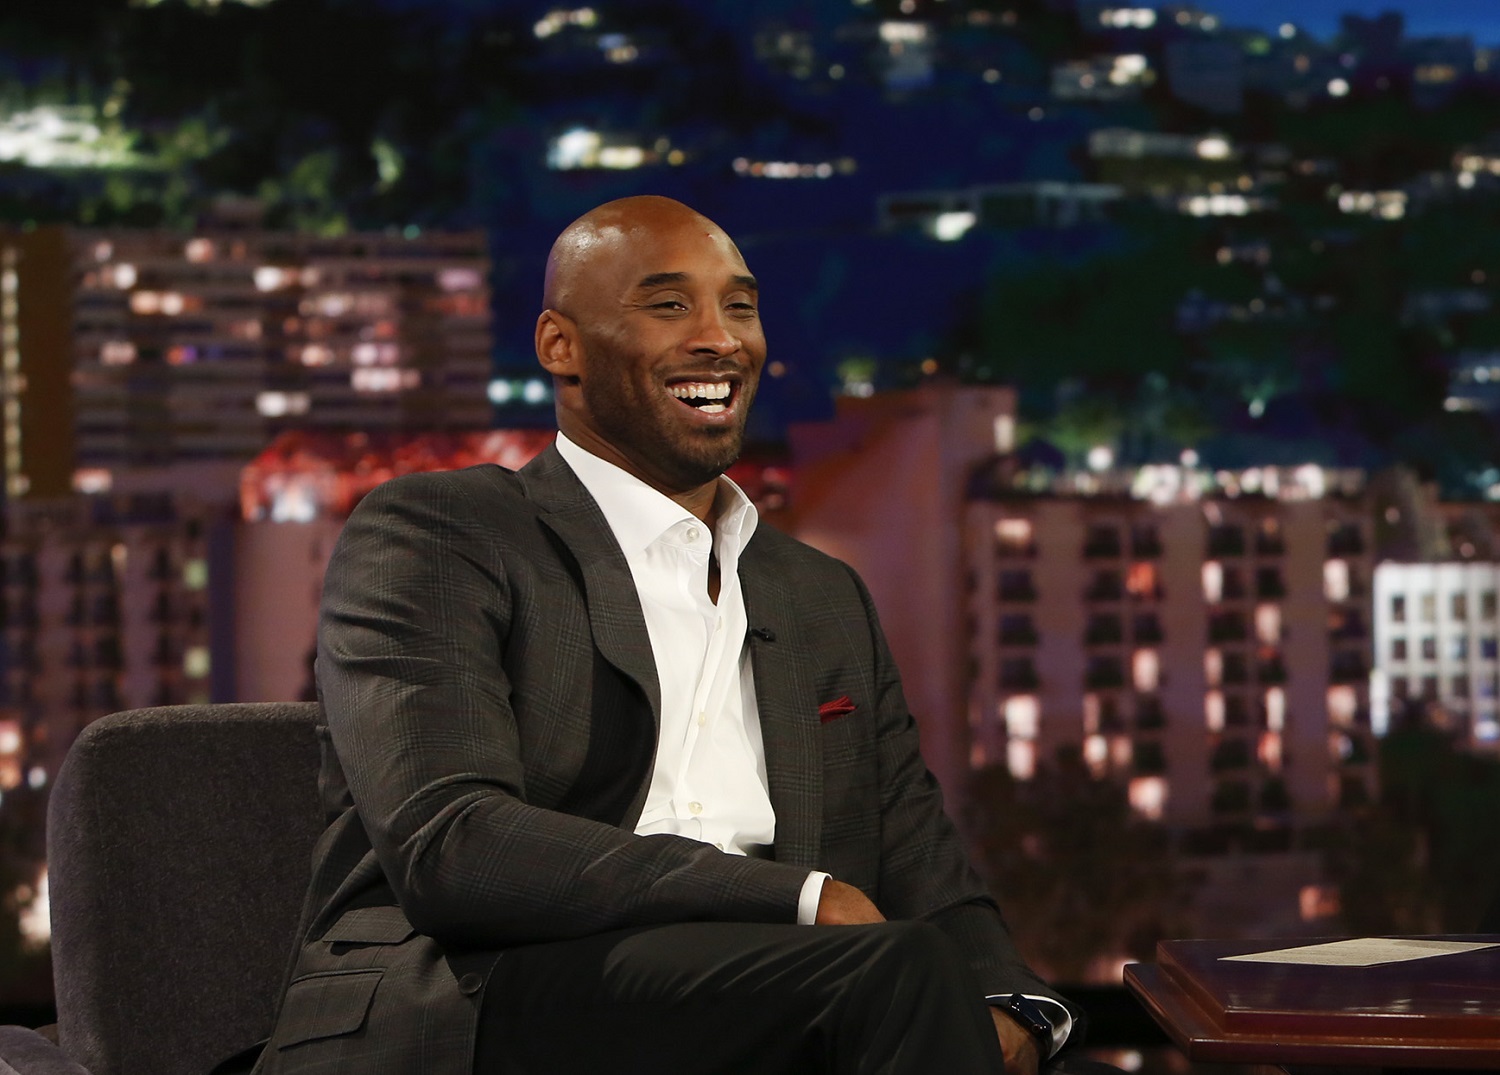 Kobe Bryant's death at the age of 41 resulted in a wrongful death lawsuit that remains unresolved.